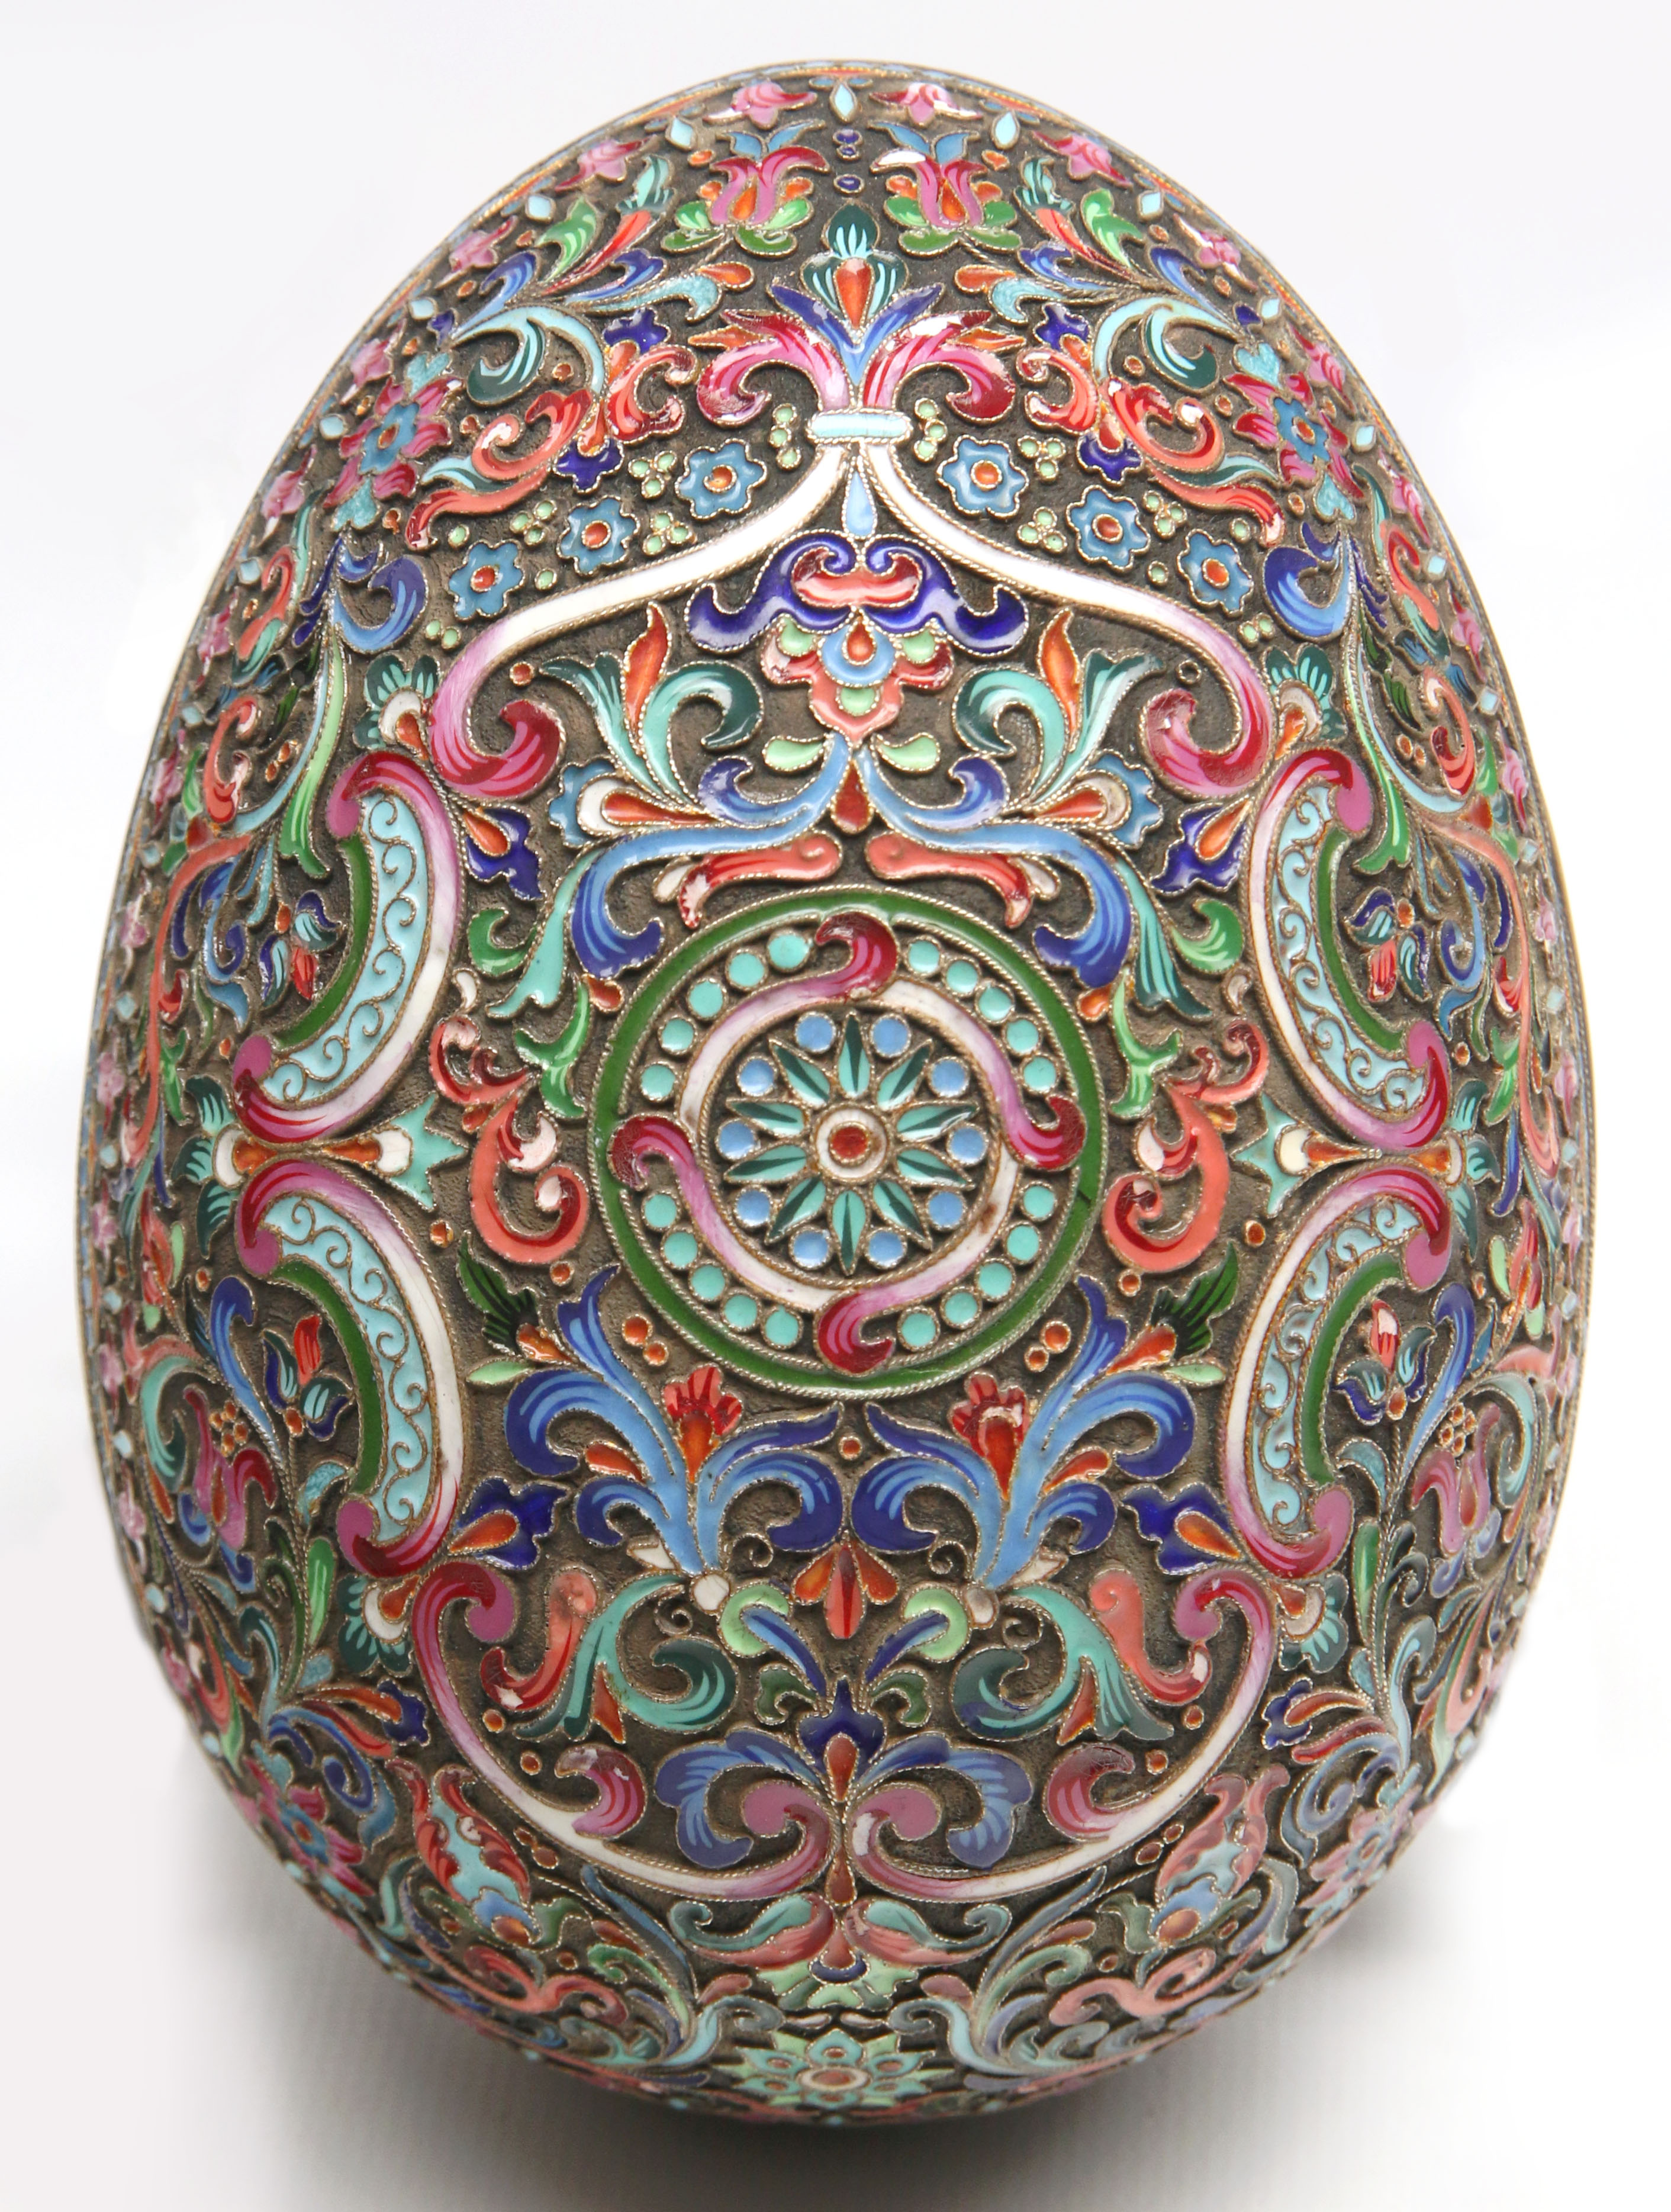 A RUSSIAN CHAMPLEVE EGG ATTRIBUTED PAVEL OVCHINNIK